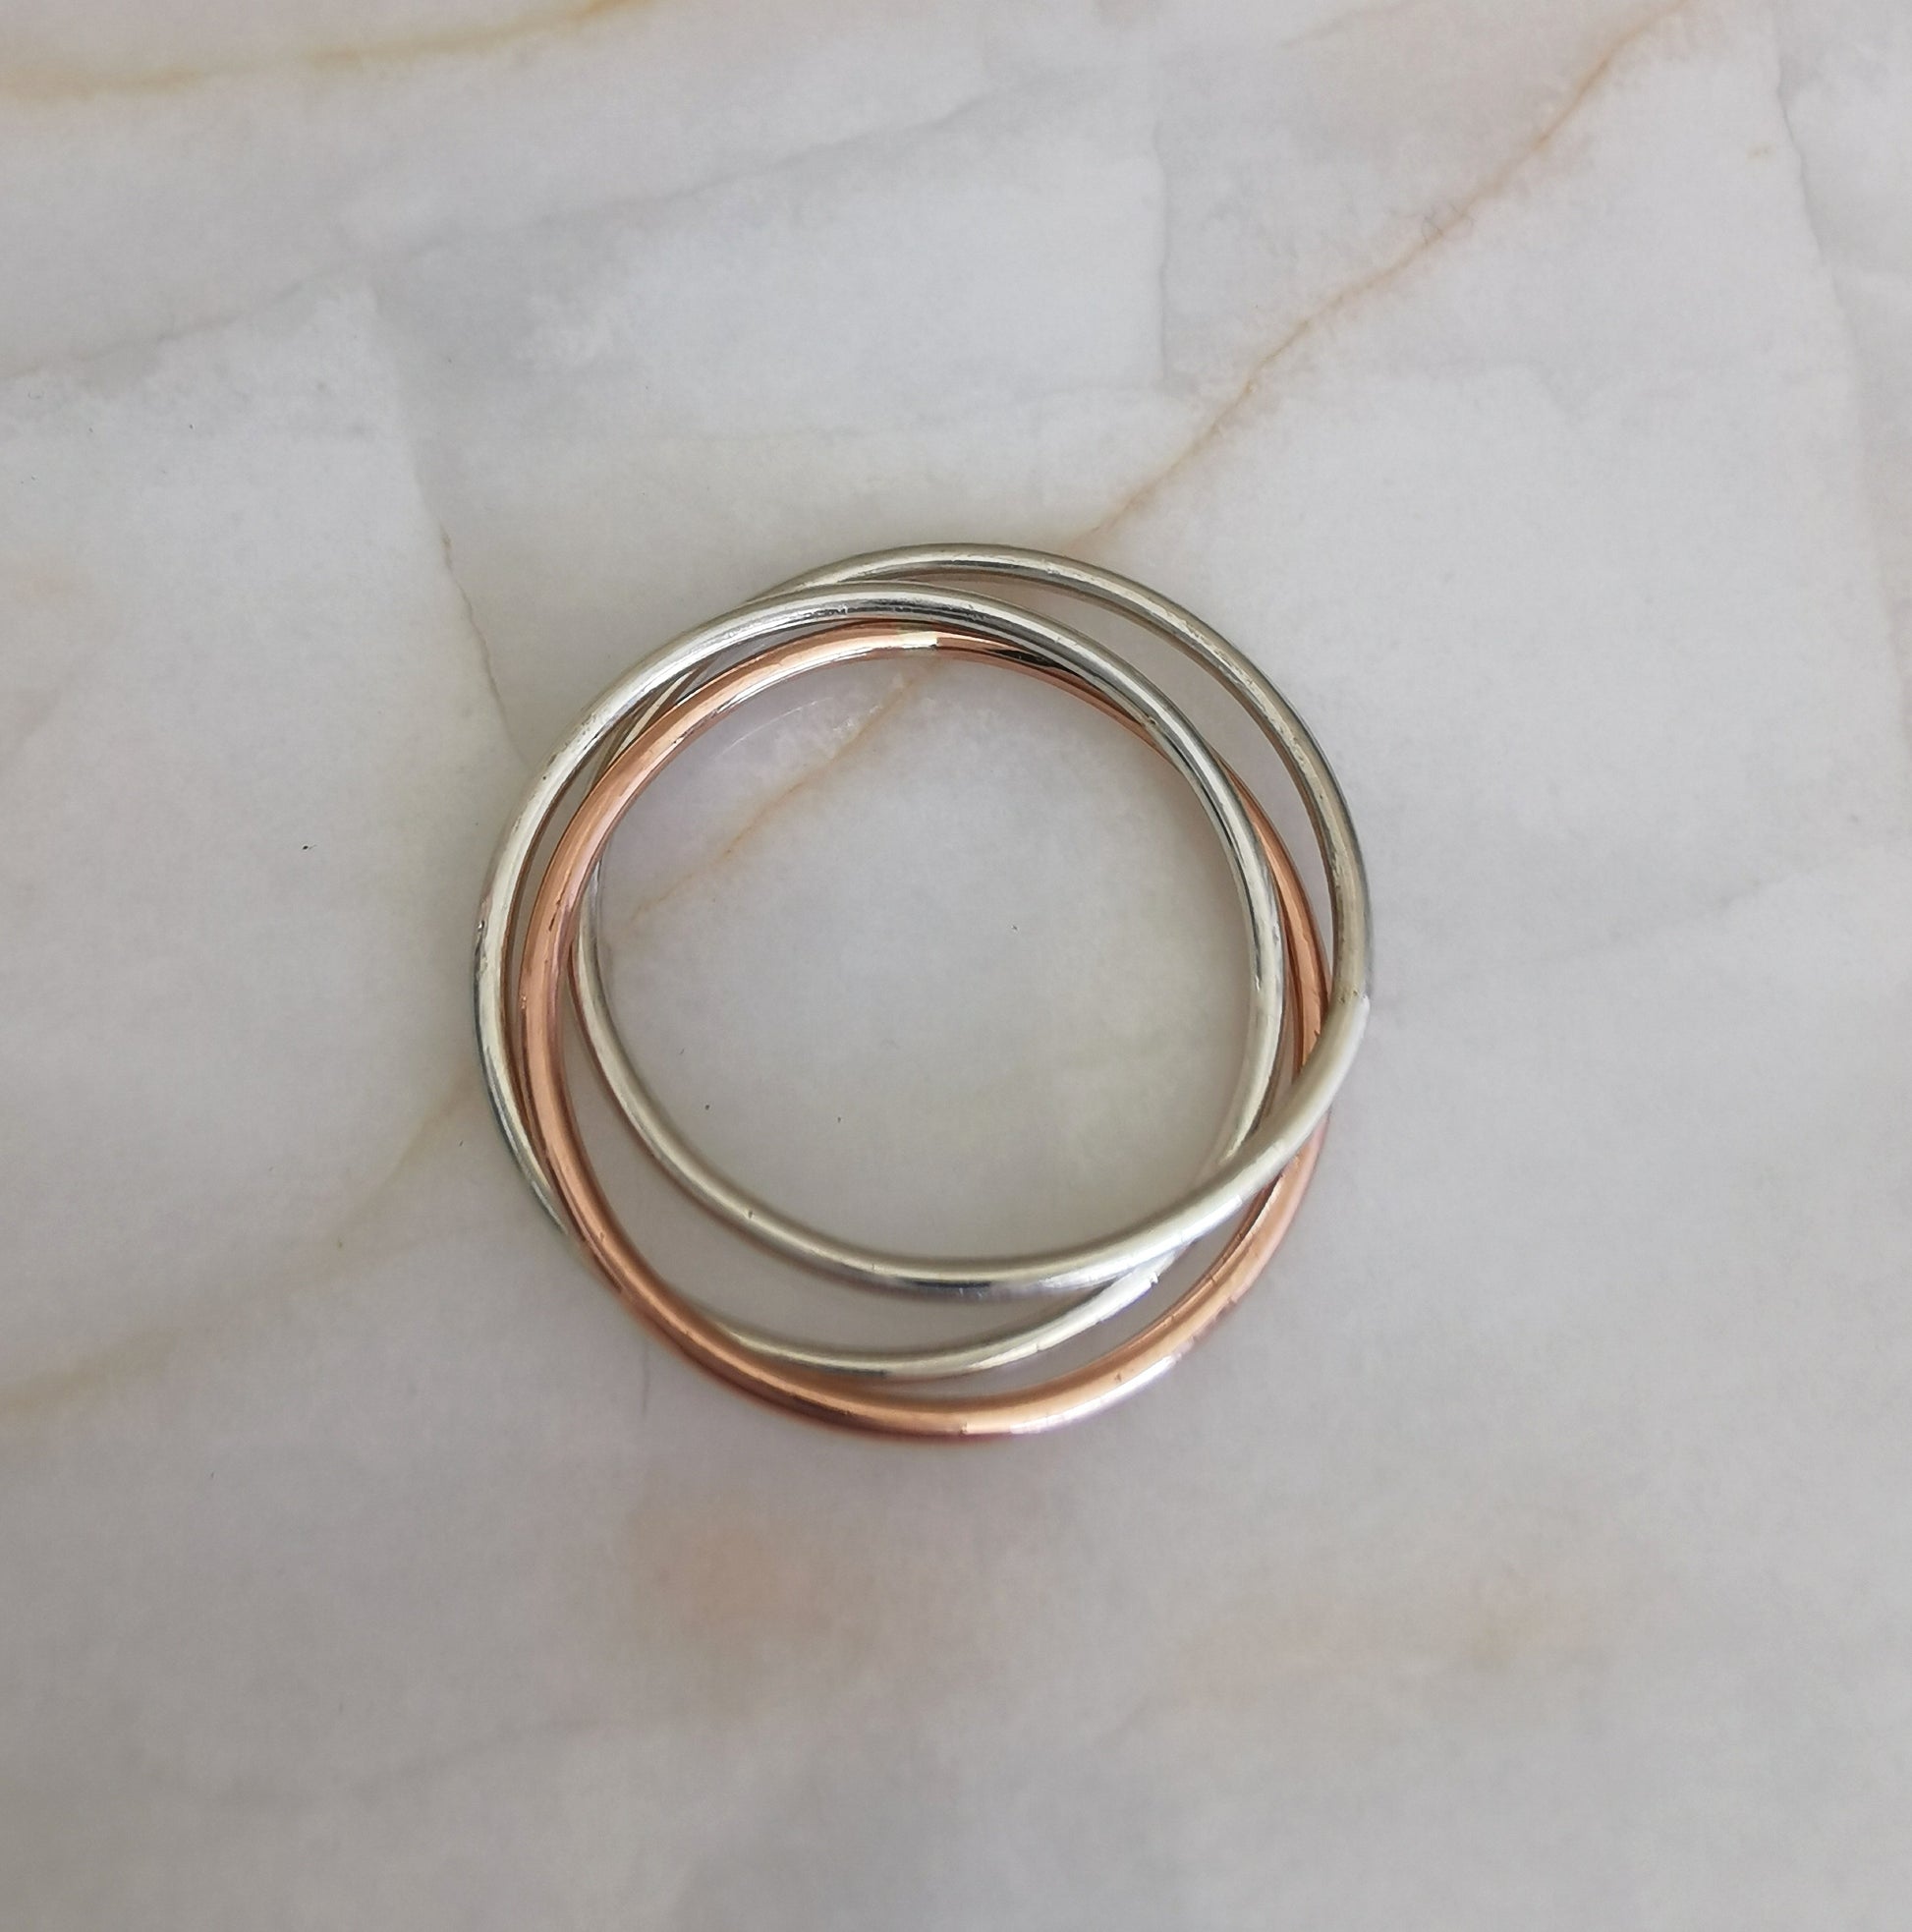 Russian Ring with 2 Silver Bands and 1 9ct Rose Gold Band